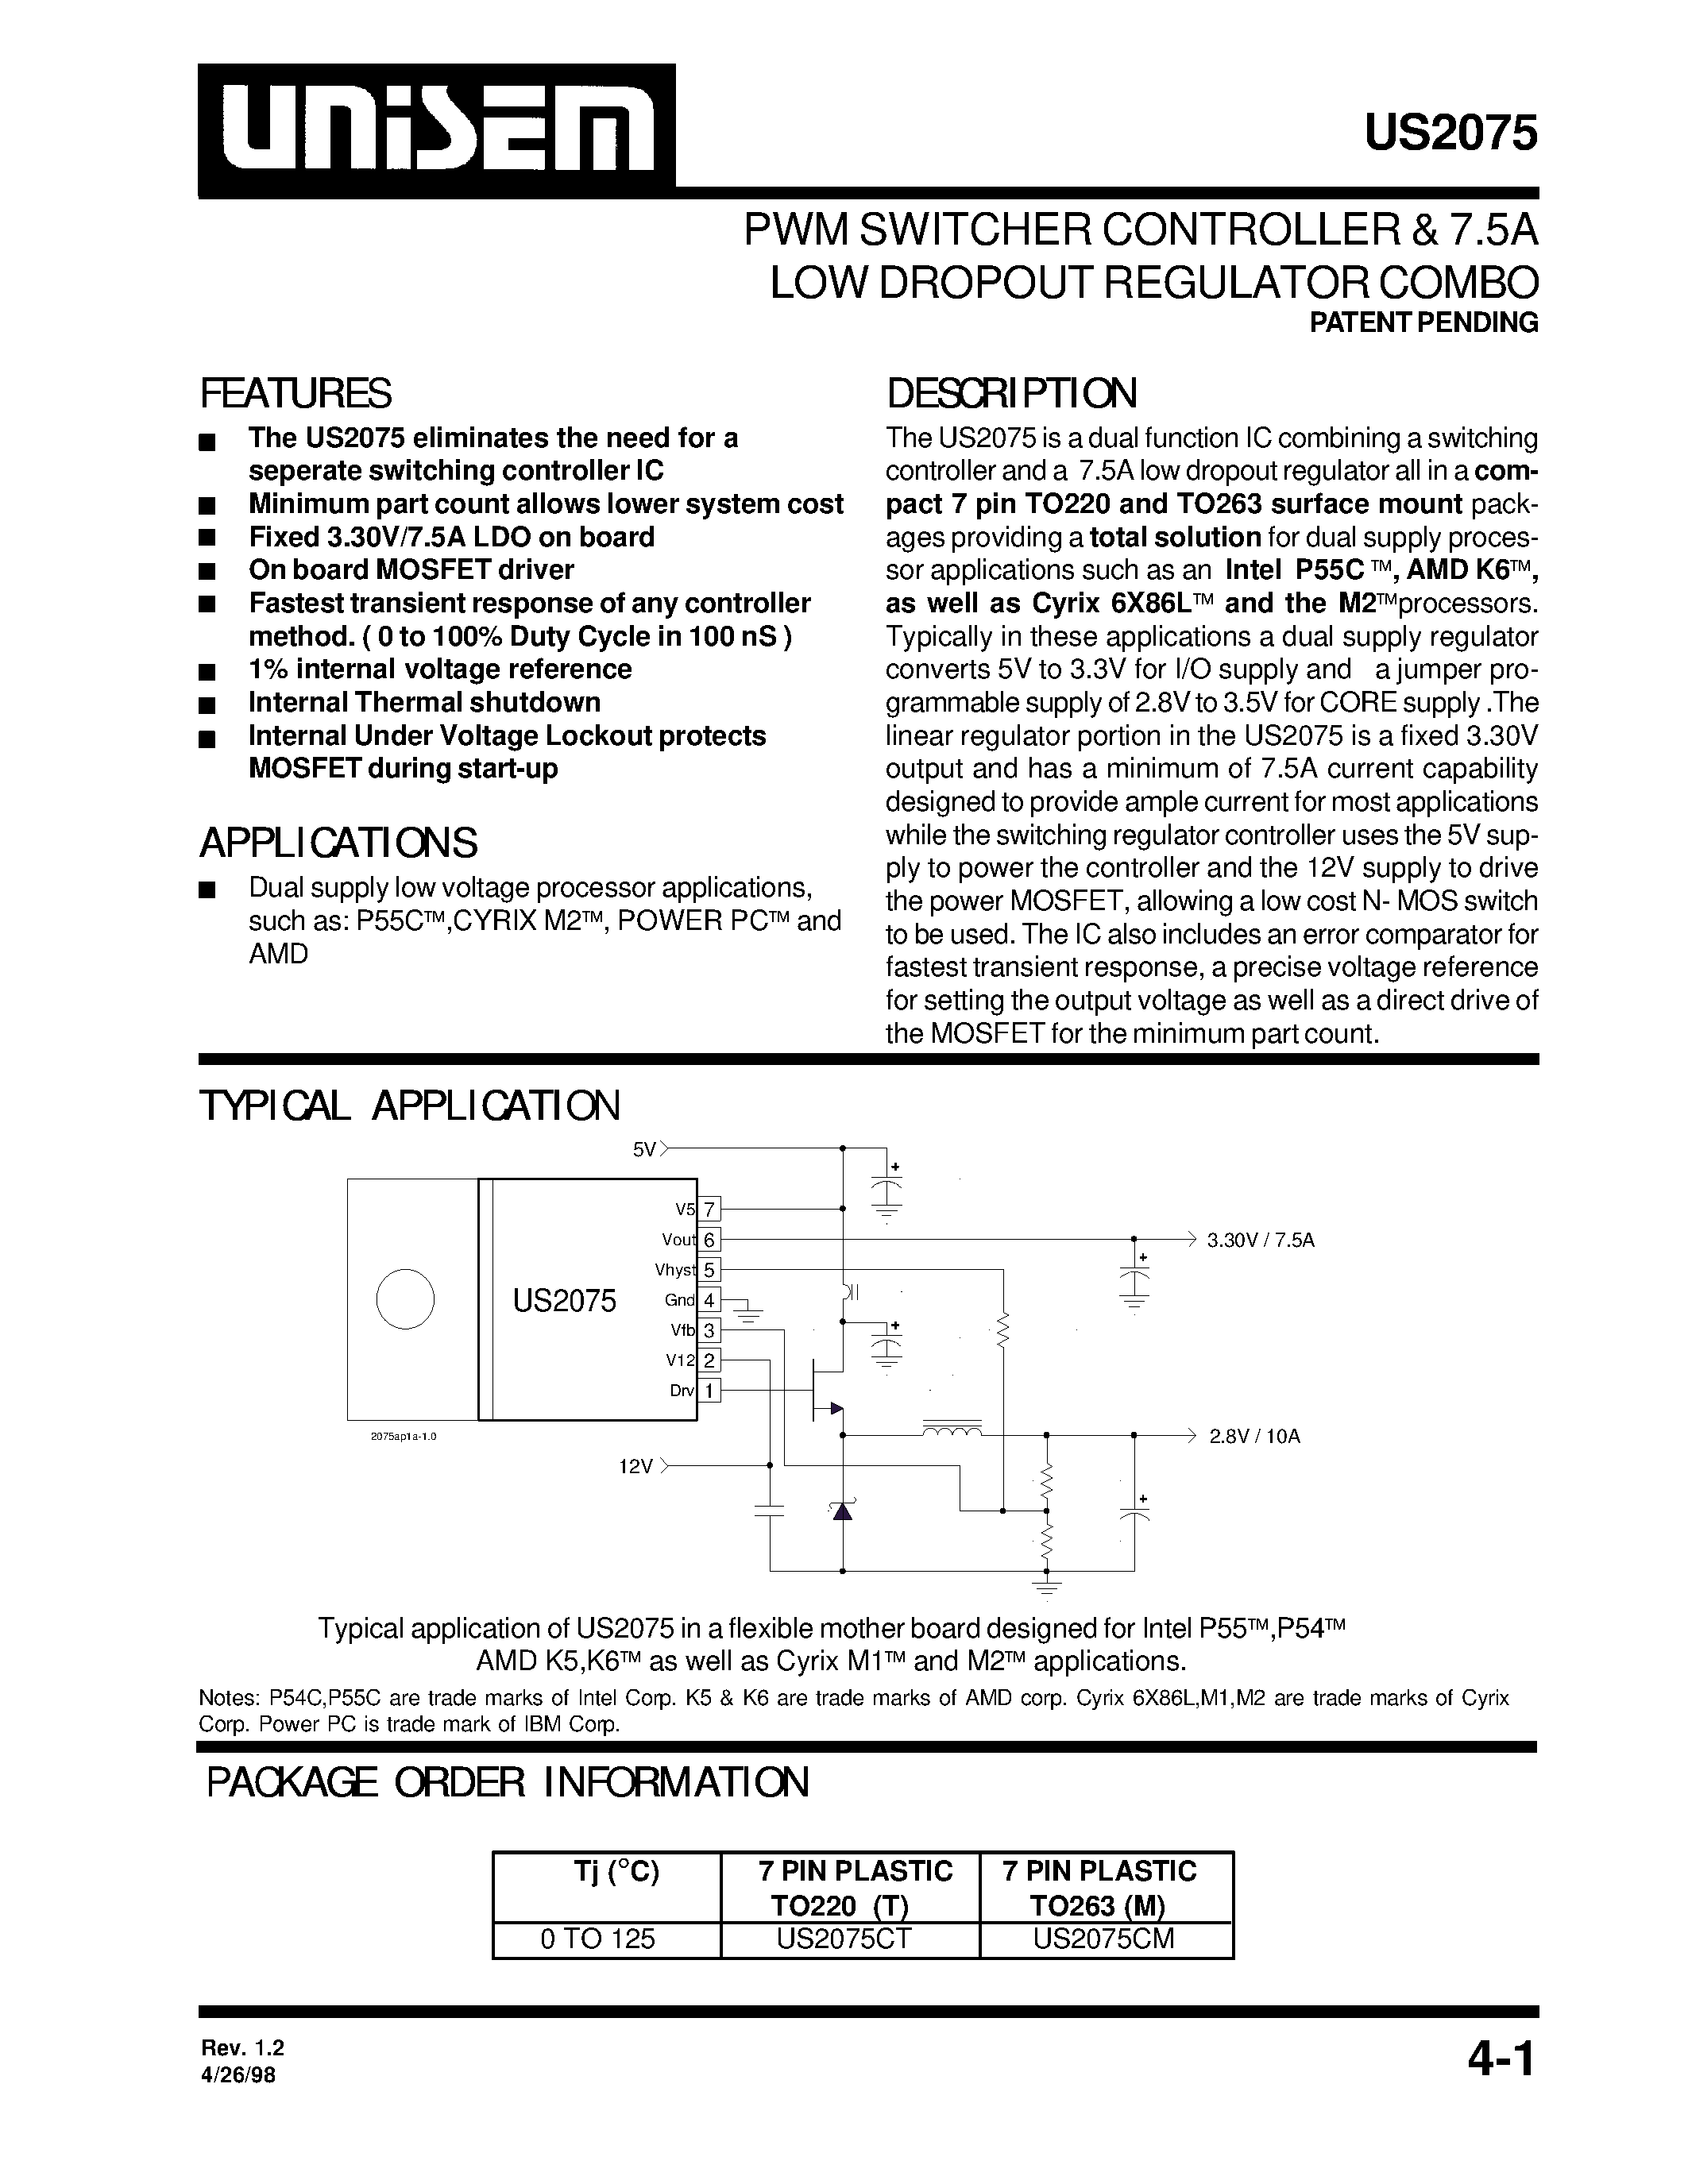 Datasheet US2075CM - PWM SWITCHER CONTROLLER & 7.5A LOW DROPOUT REGULATOR COMBO page 1